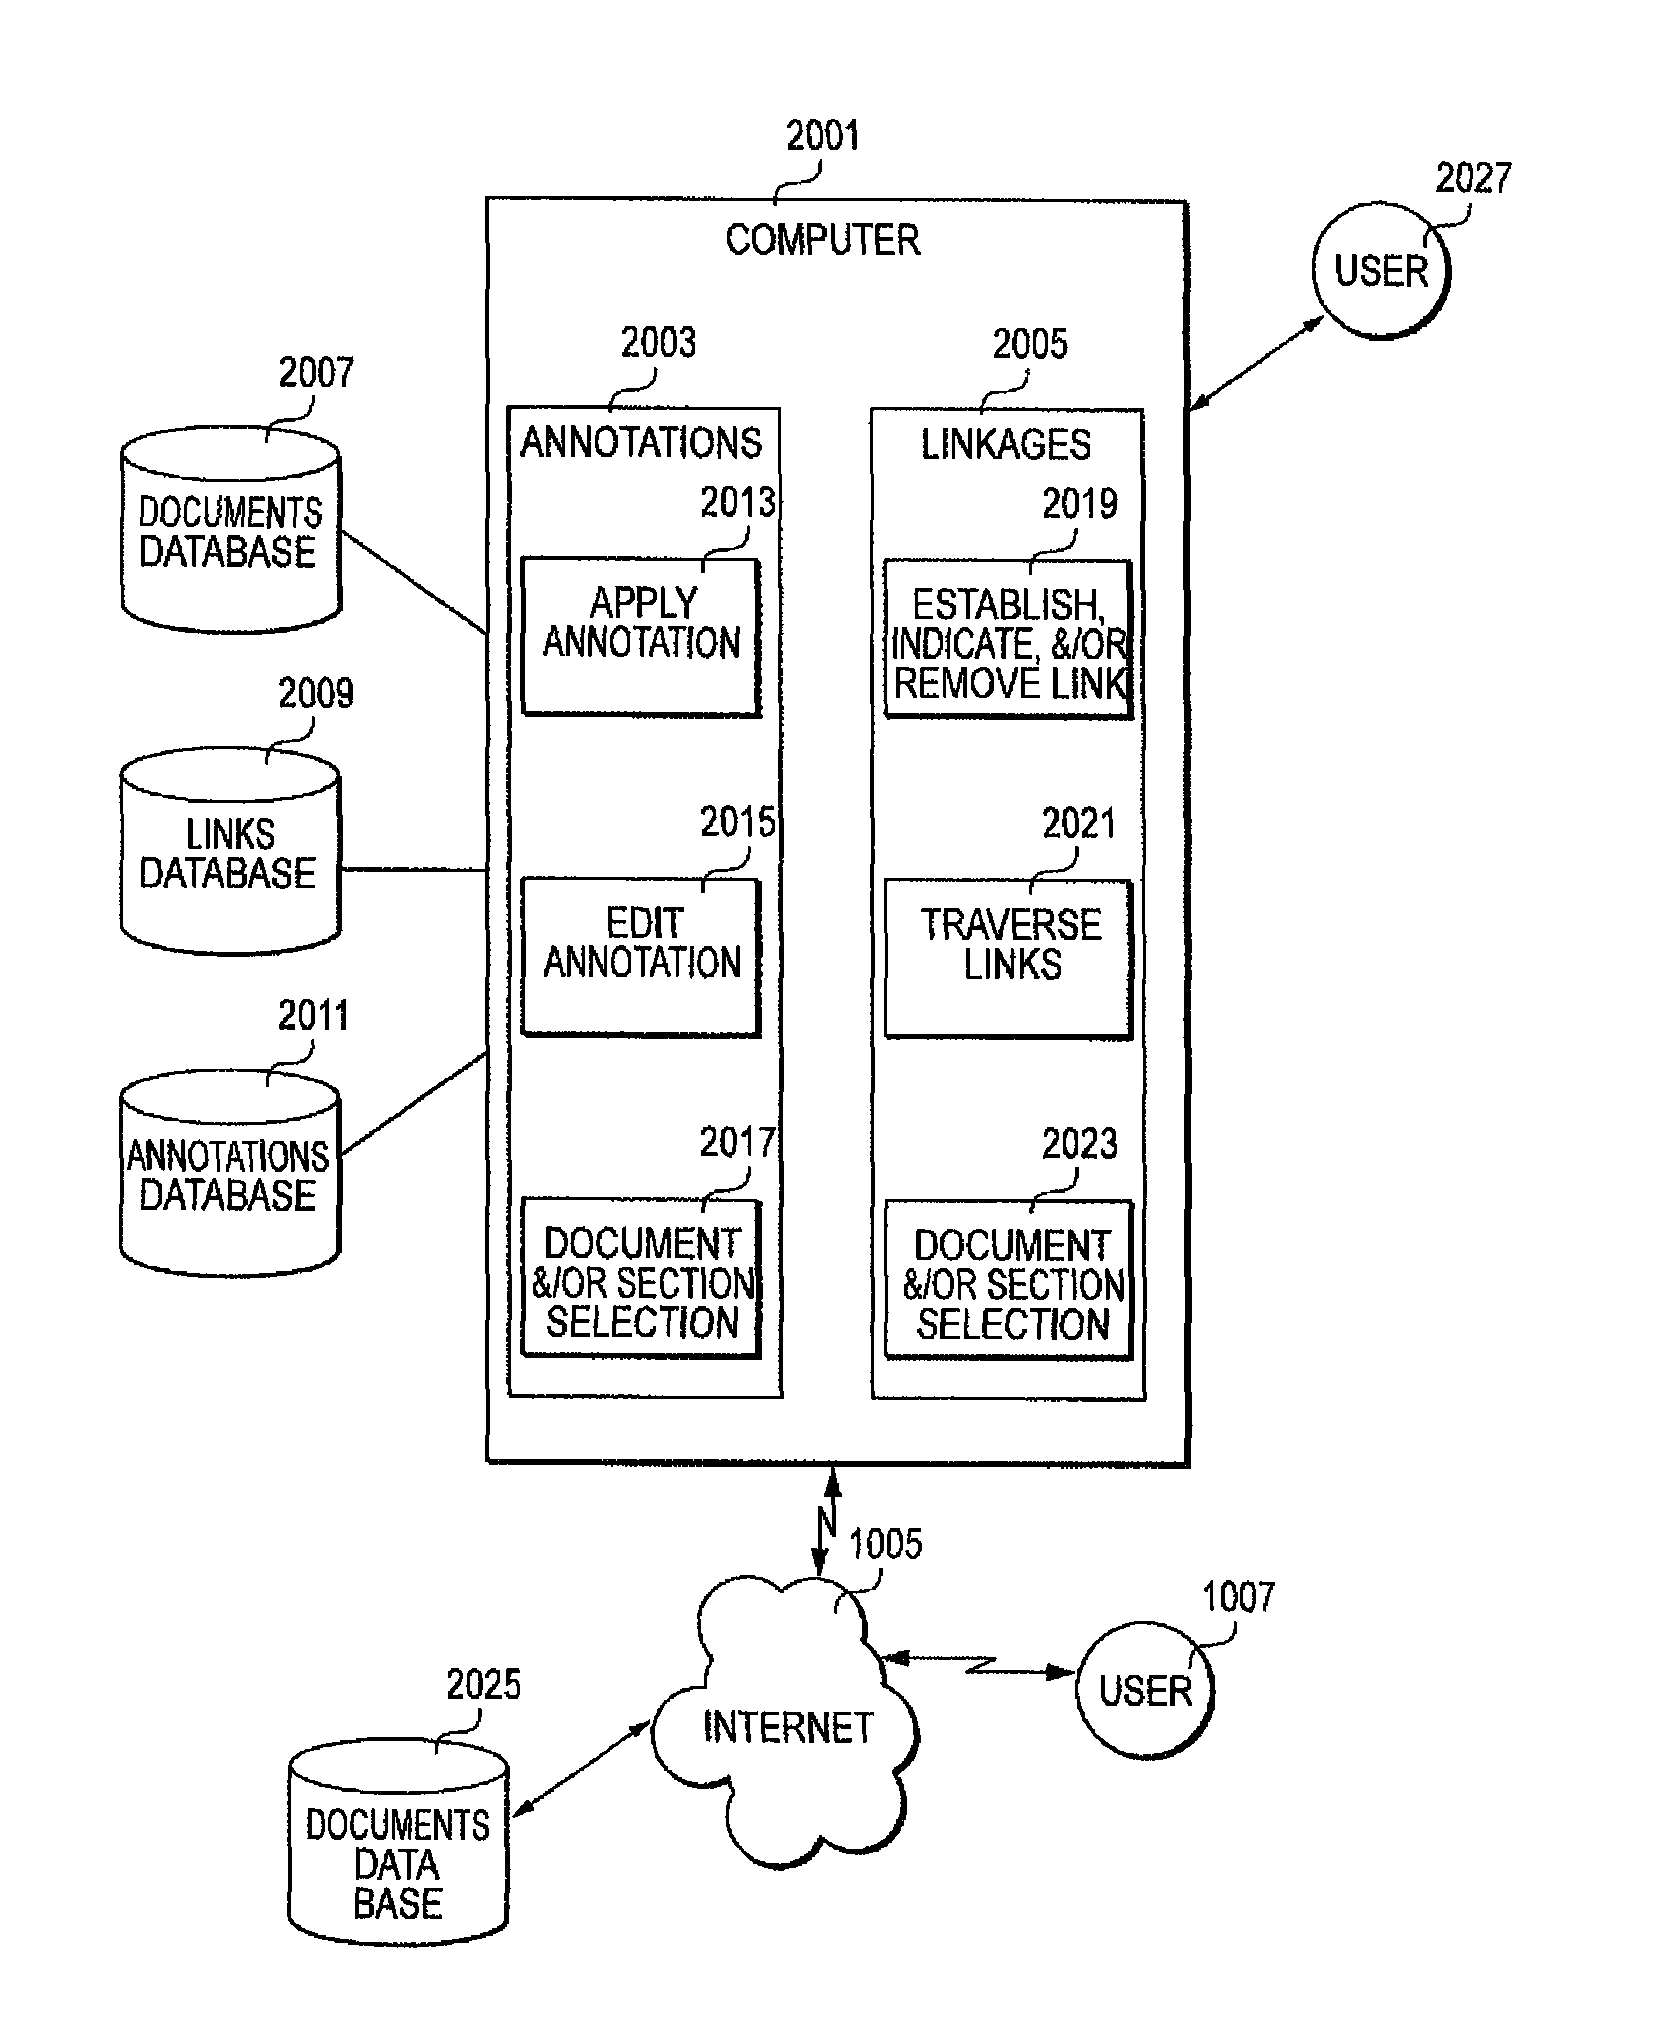 Computer-implemented method and system for managing attributes of intellectual property documents, optionally including organization thereof